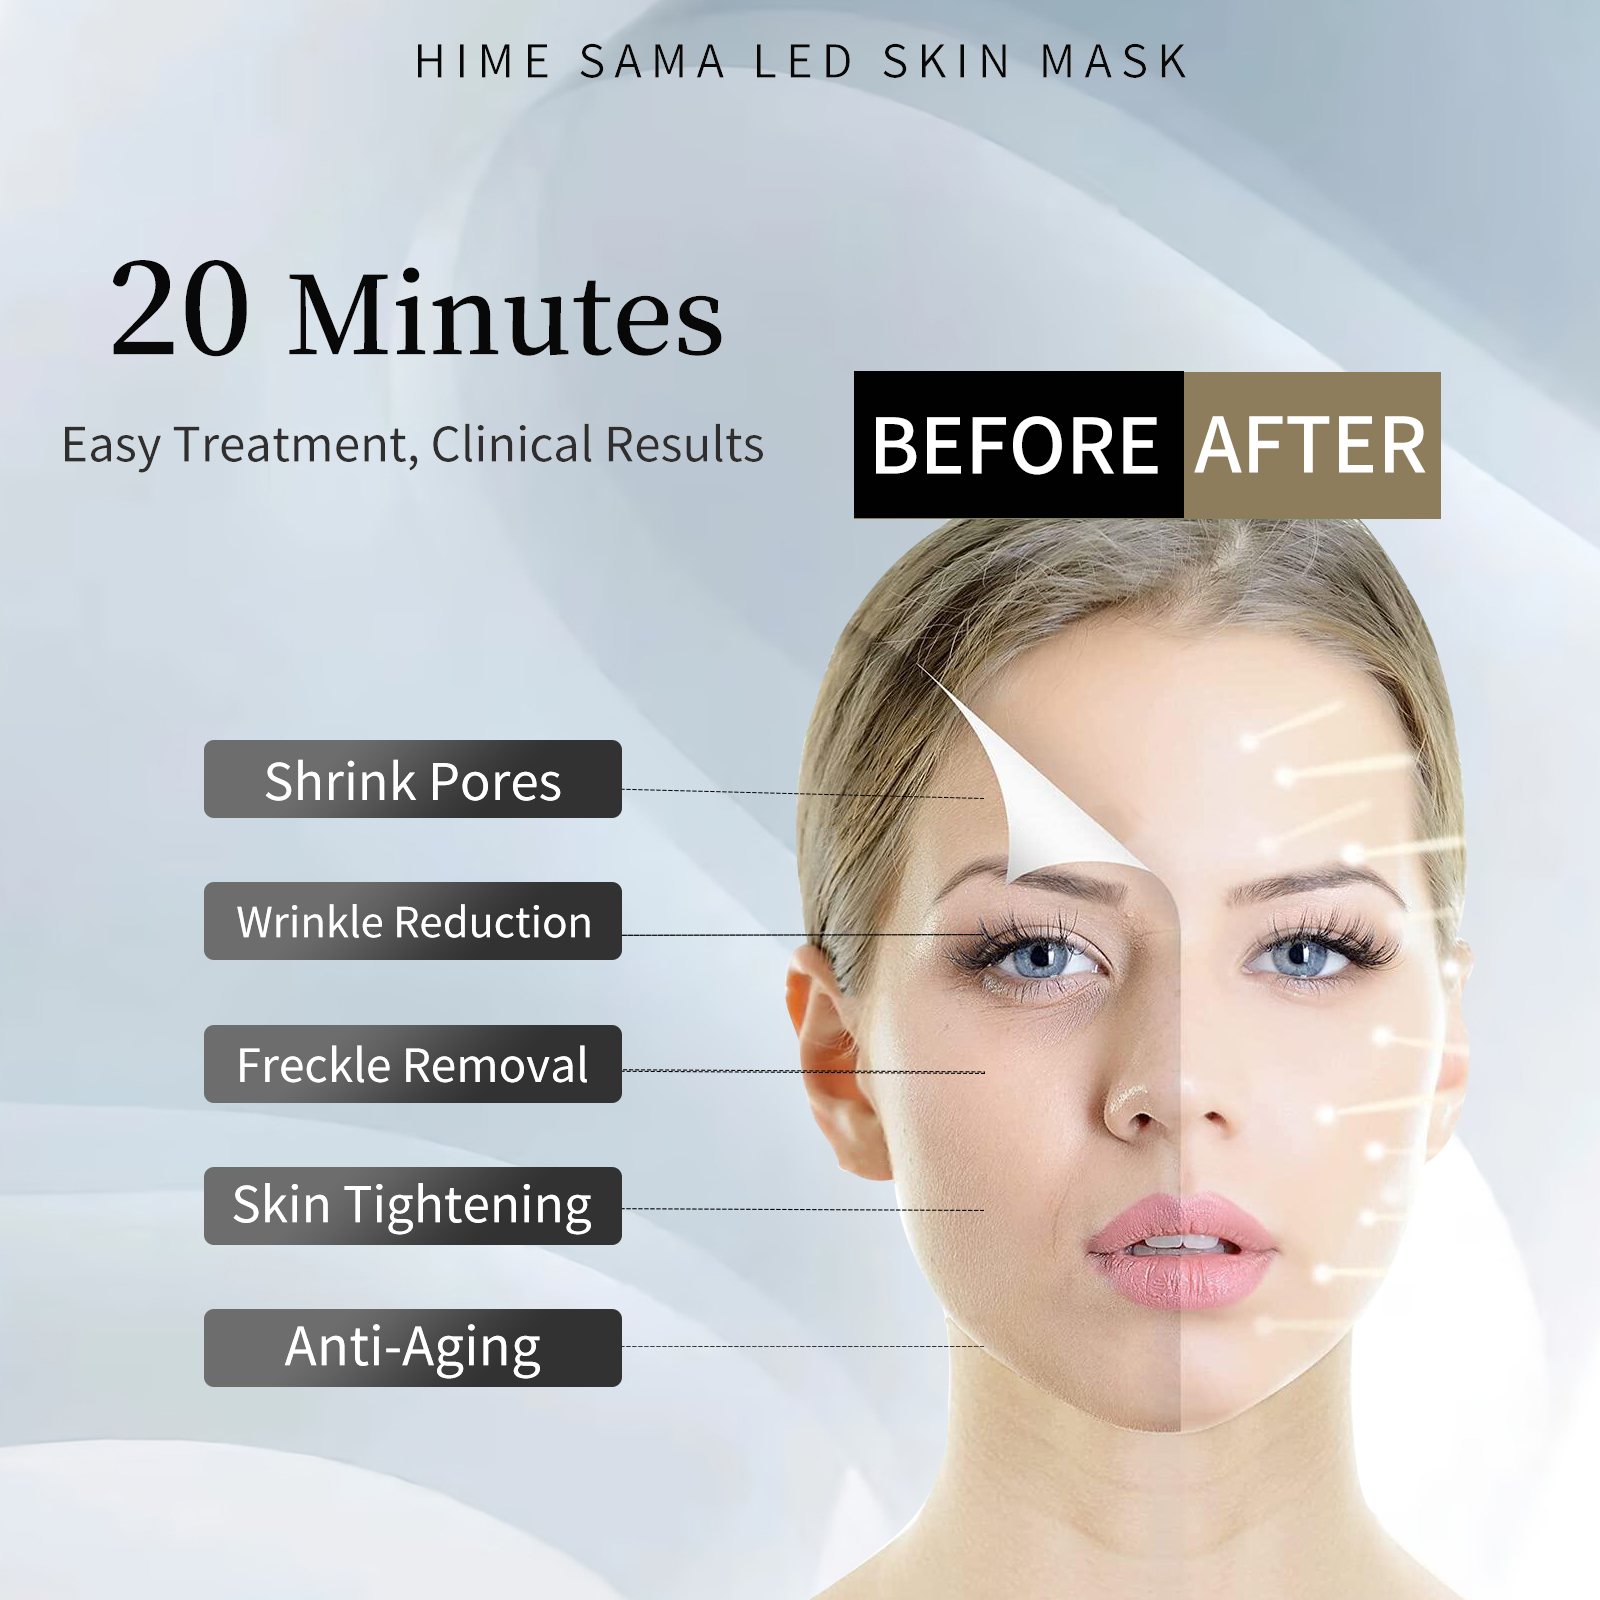 LED Skin Mask-CE Cleared Pro 7 LED Skin Care Mask for Face and Neck Skin Rejuvenation Light Therapy Facial Care Mask and Optical Cosmetic Mask Portable for Home and Travel Use - image 4 of 7